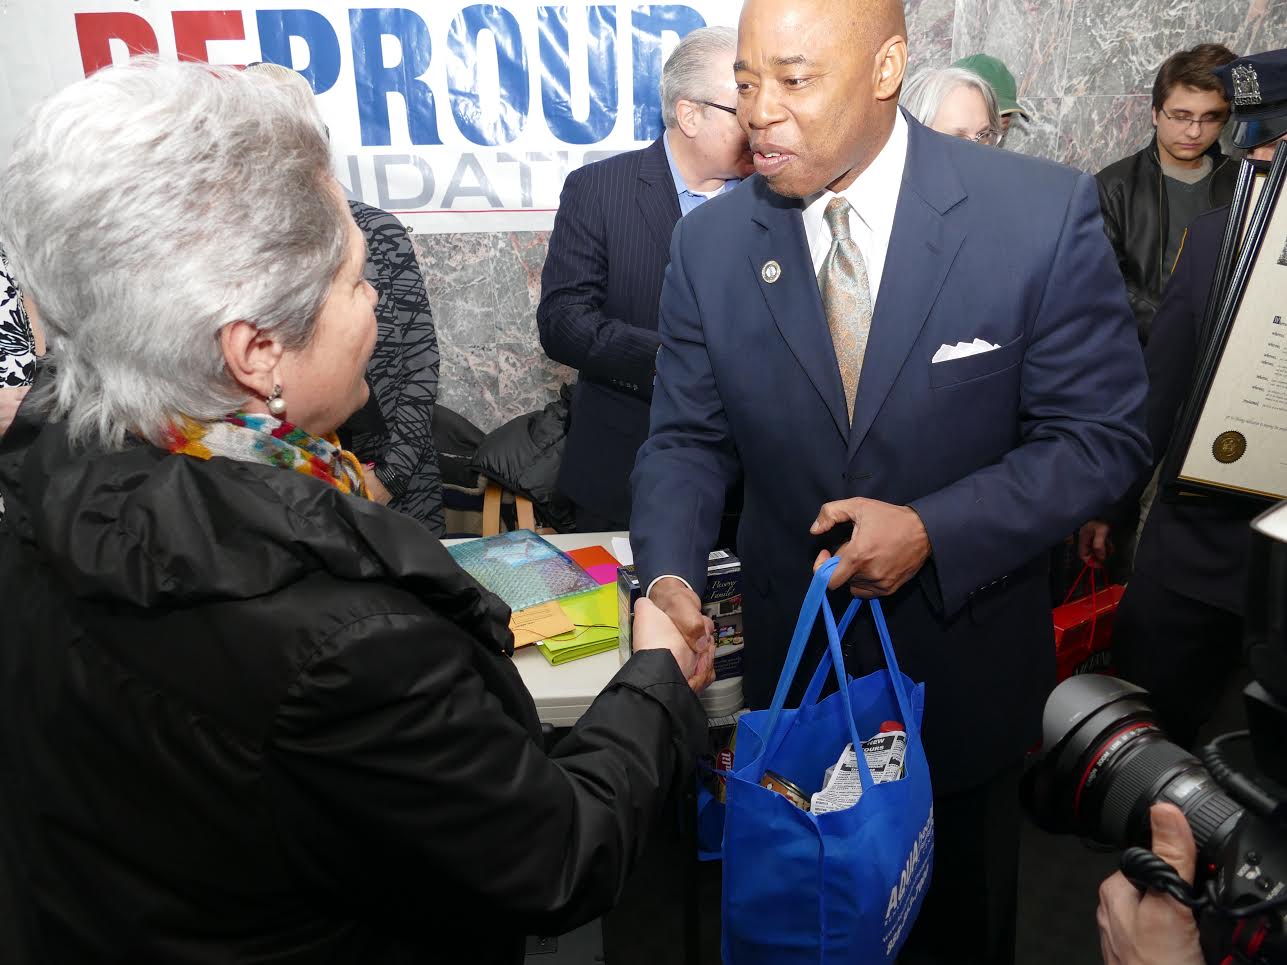 Local Pols Join Be Proud Foundation For Passover Food Distribution Event, Honor Hero Cop